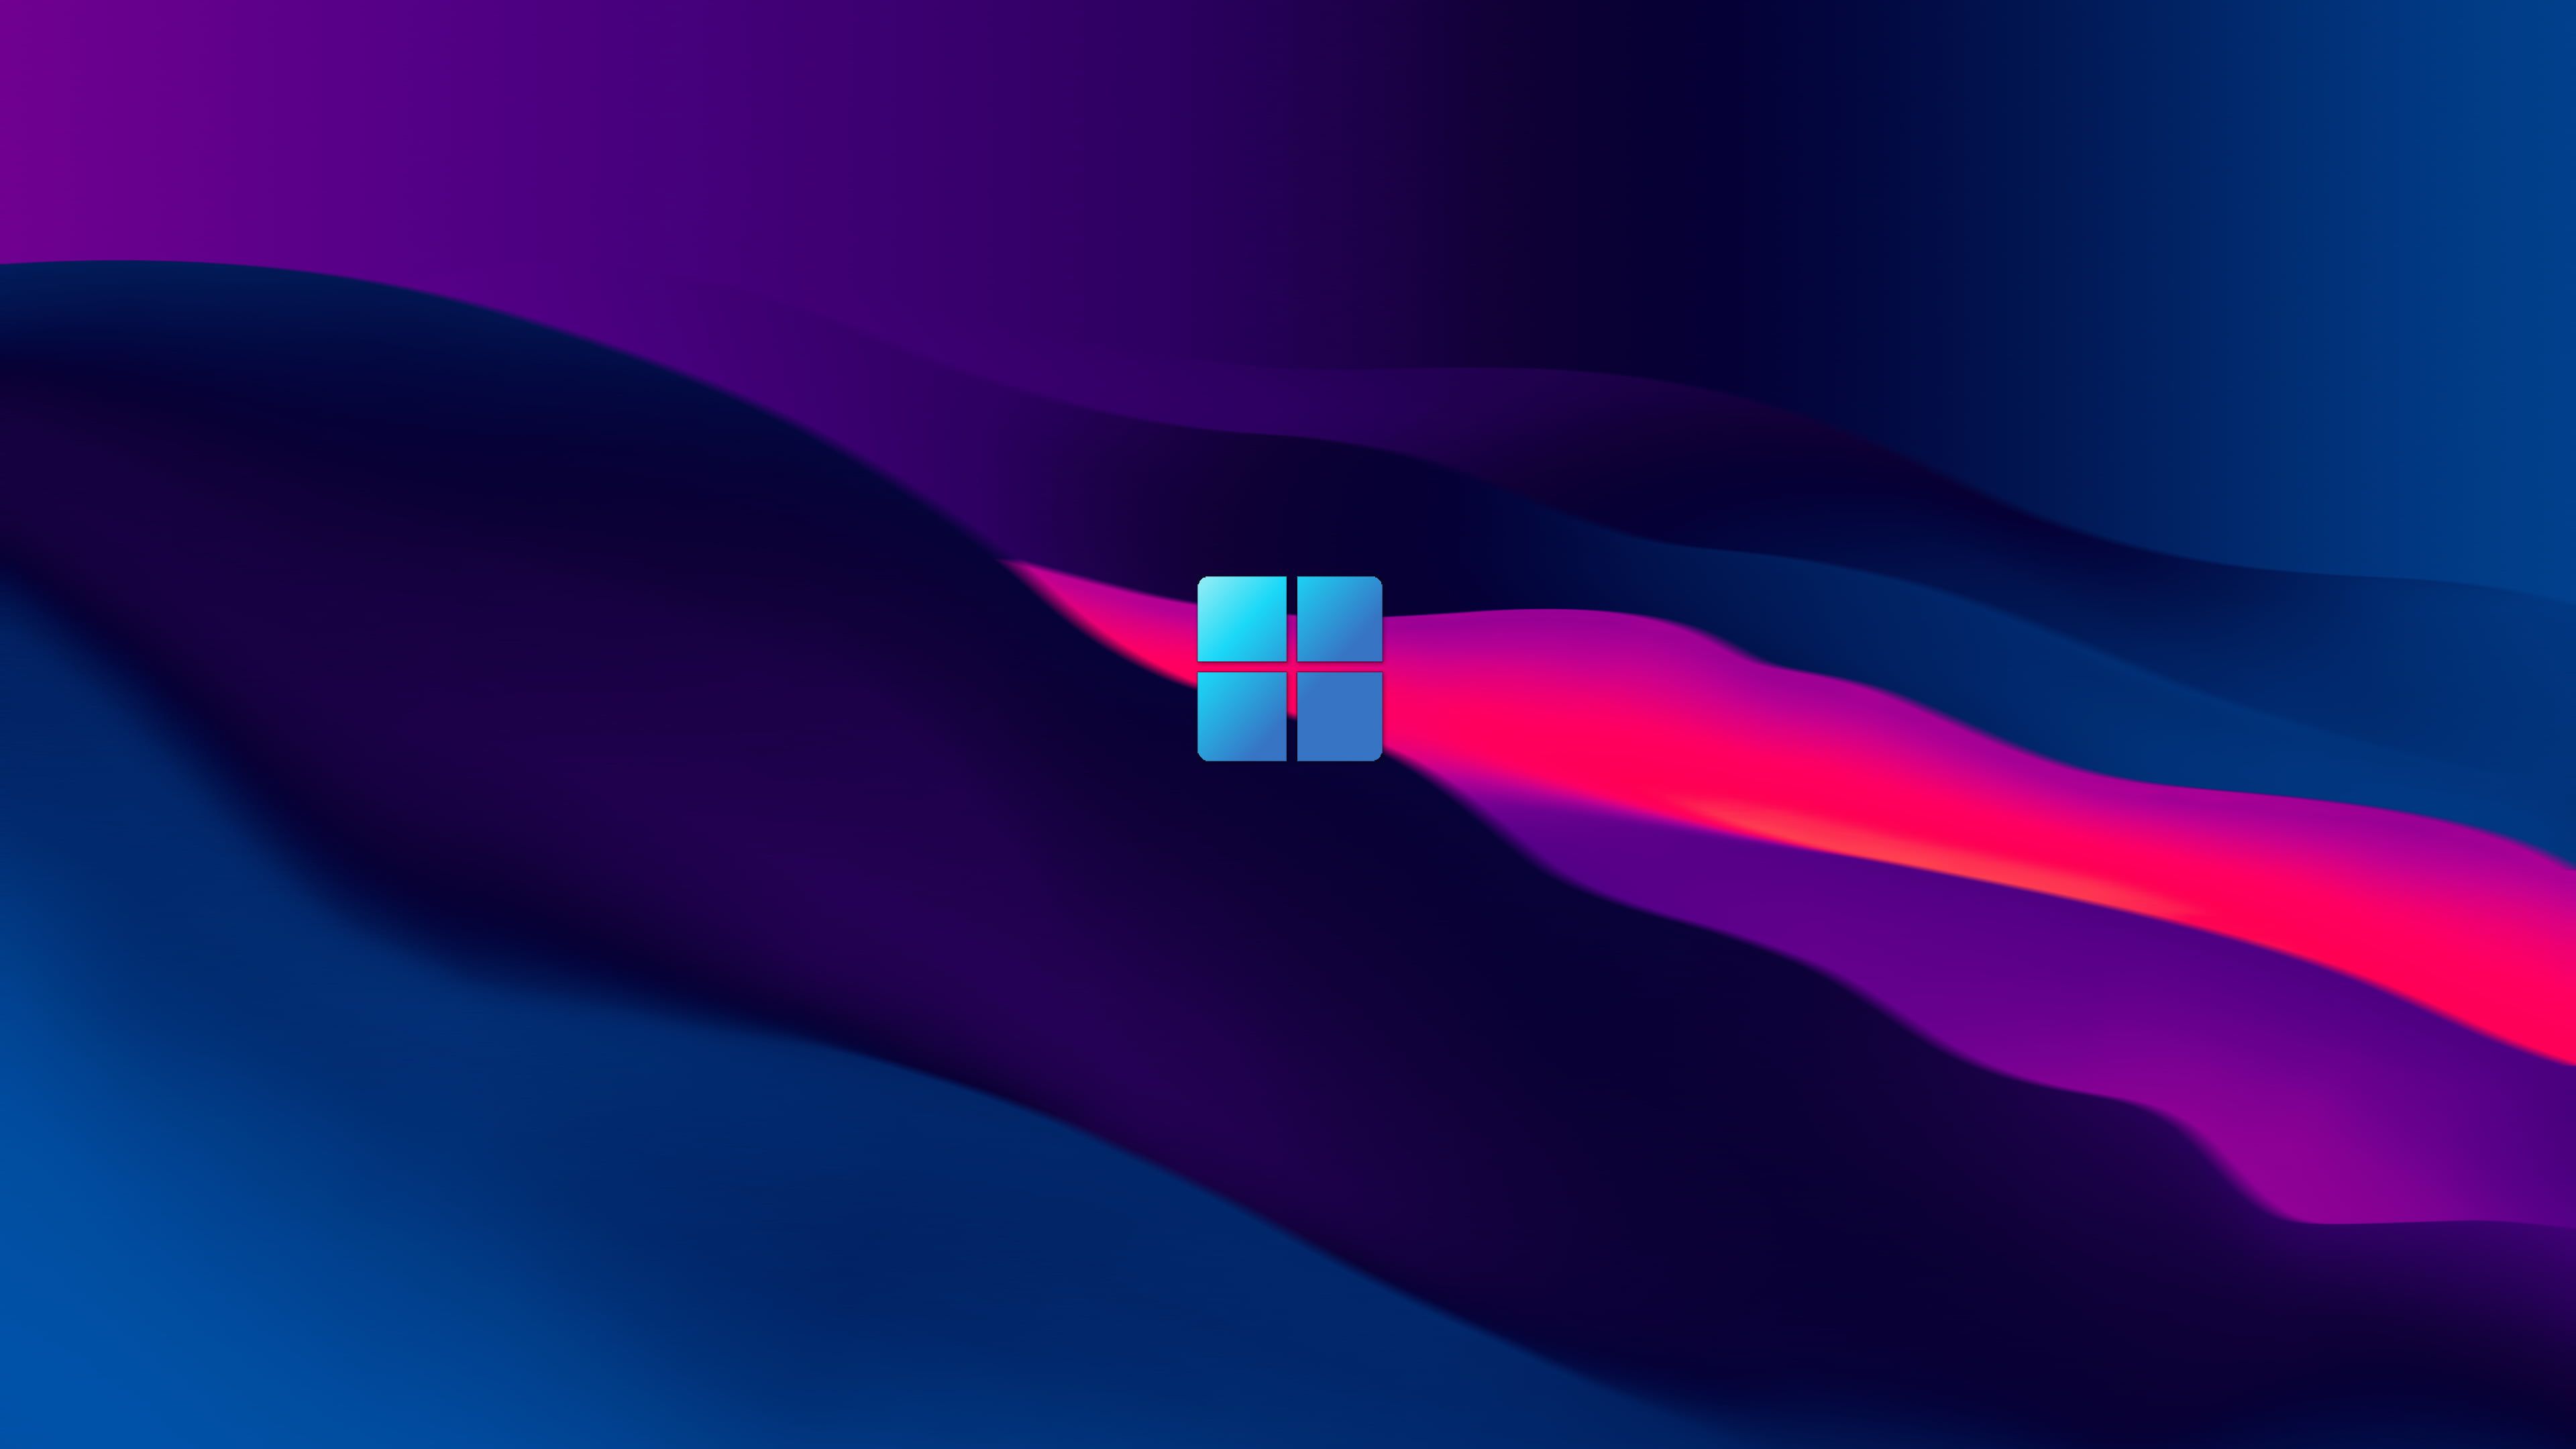 Windows 10 wallpaper 3D with dark blue, purple and pink colors, with the Windows logo in the middle - Windows 11